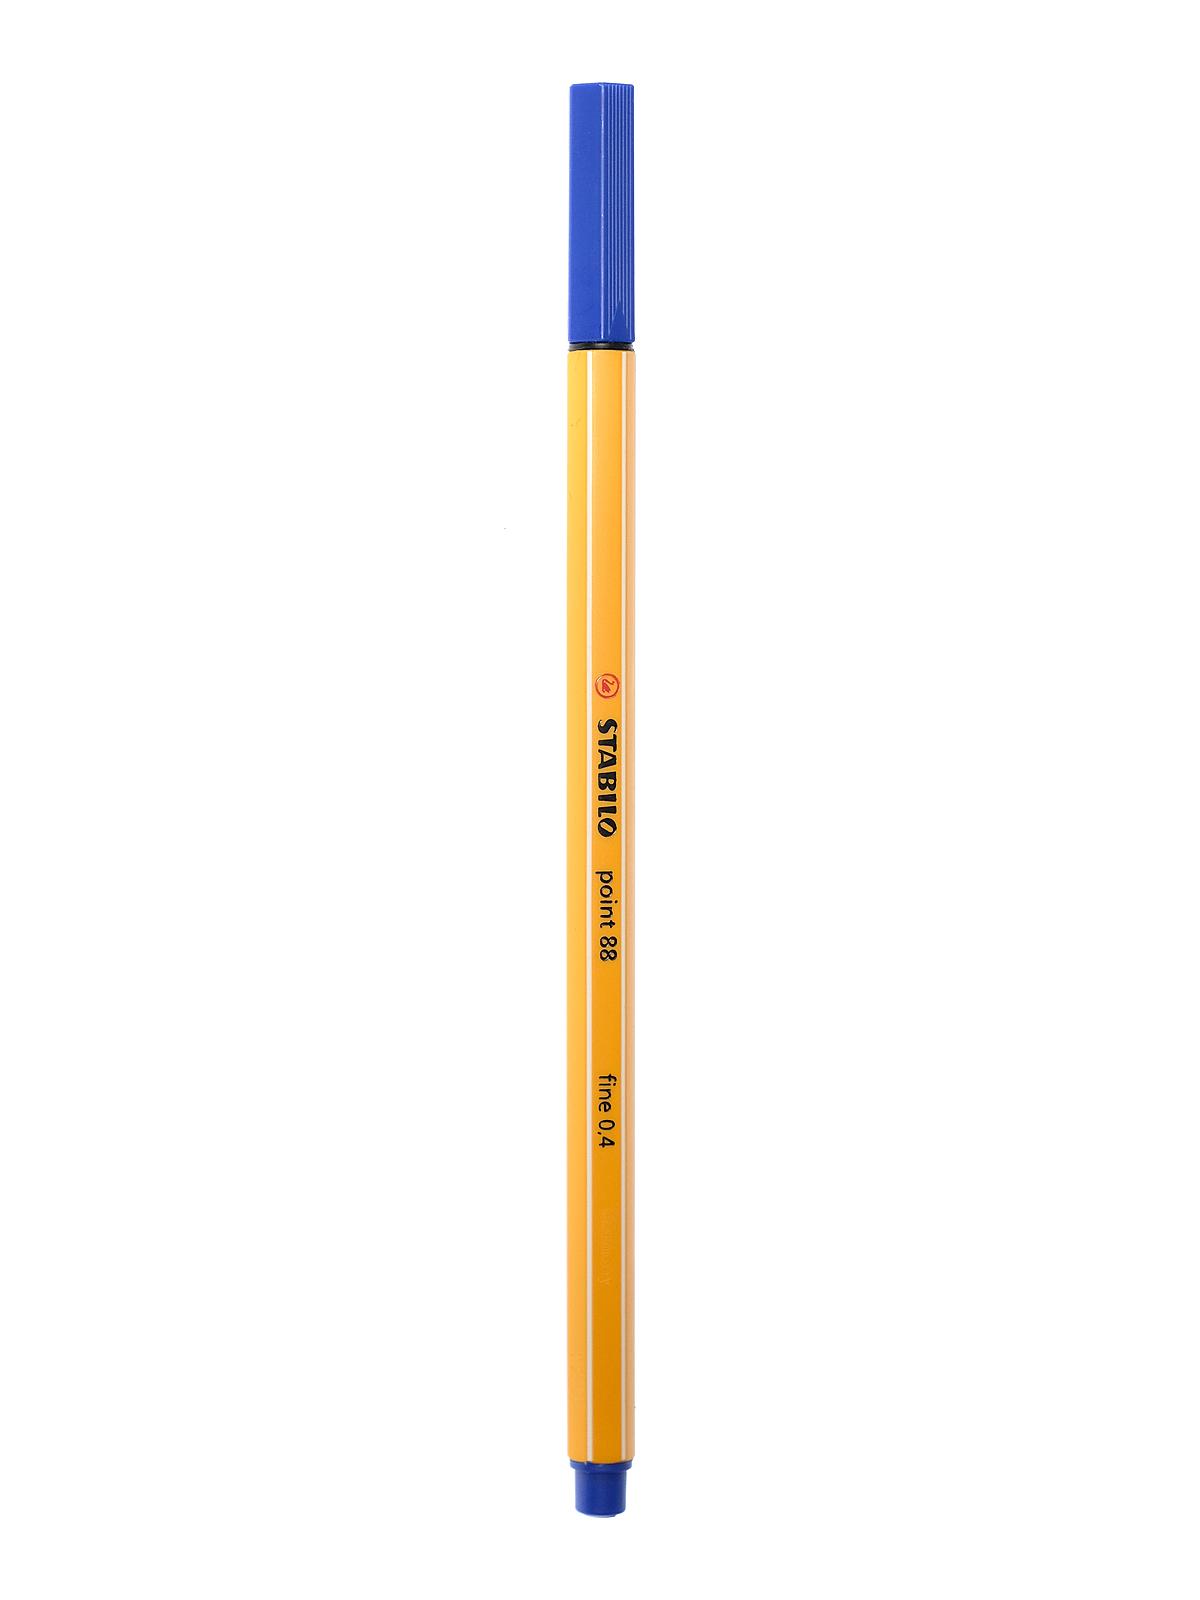  STABILO Point 88 Fineliner Pen,Ultramarine,Pack of 10 : Office  Products